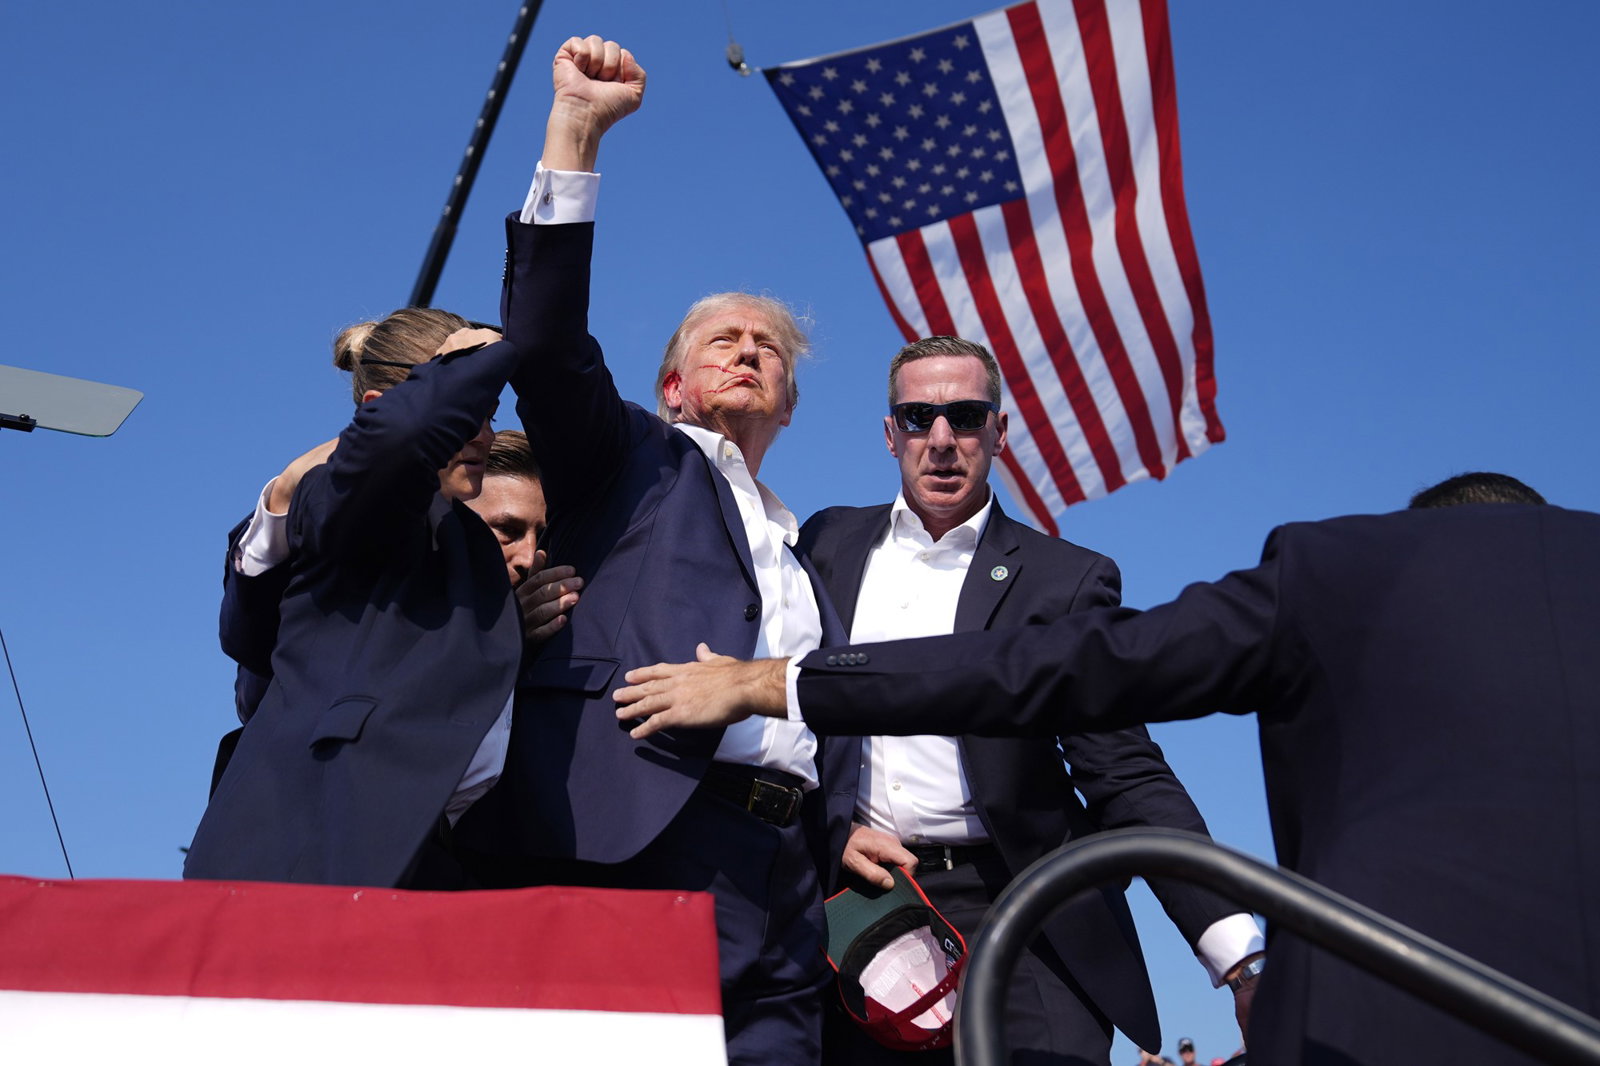 Donald Trump raises his fist in the air as he's surrounded by Secret Service agents.